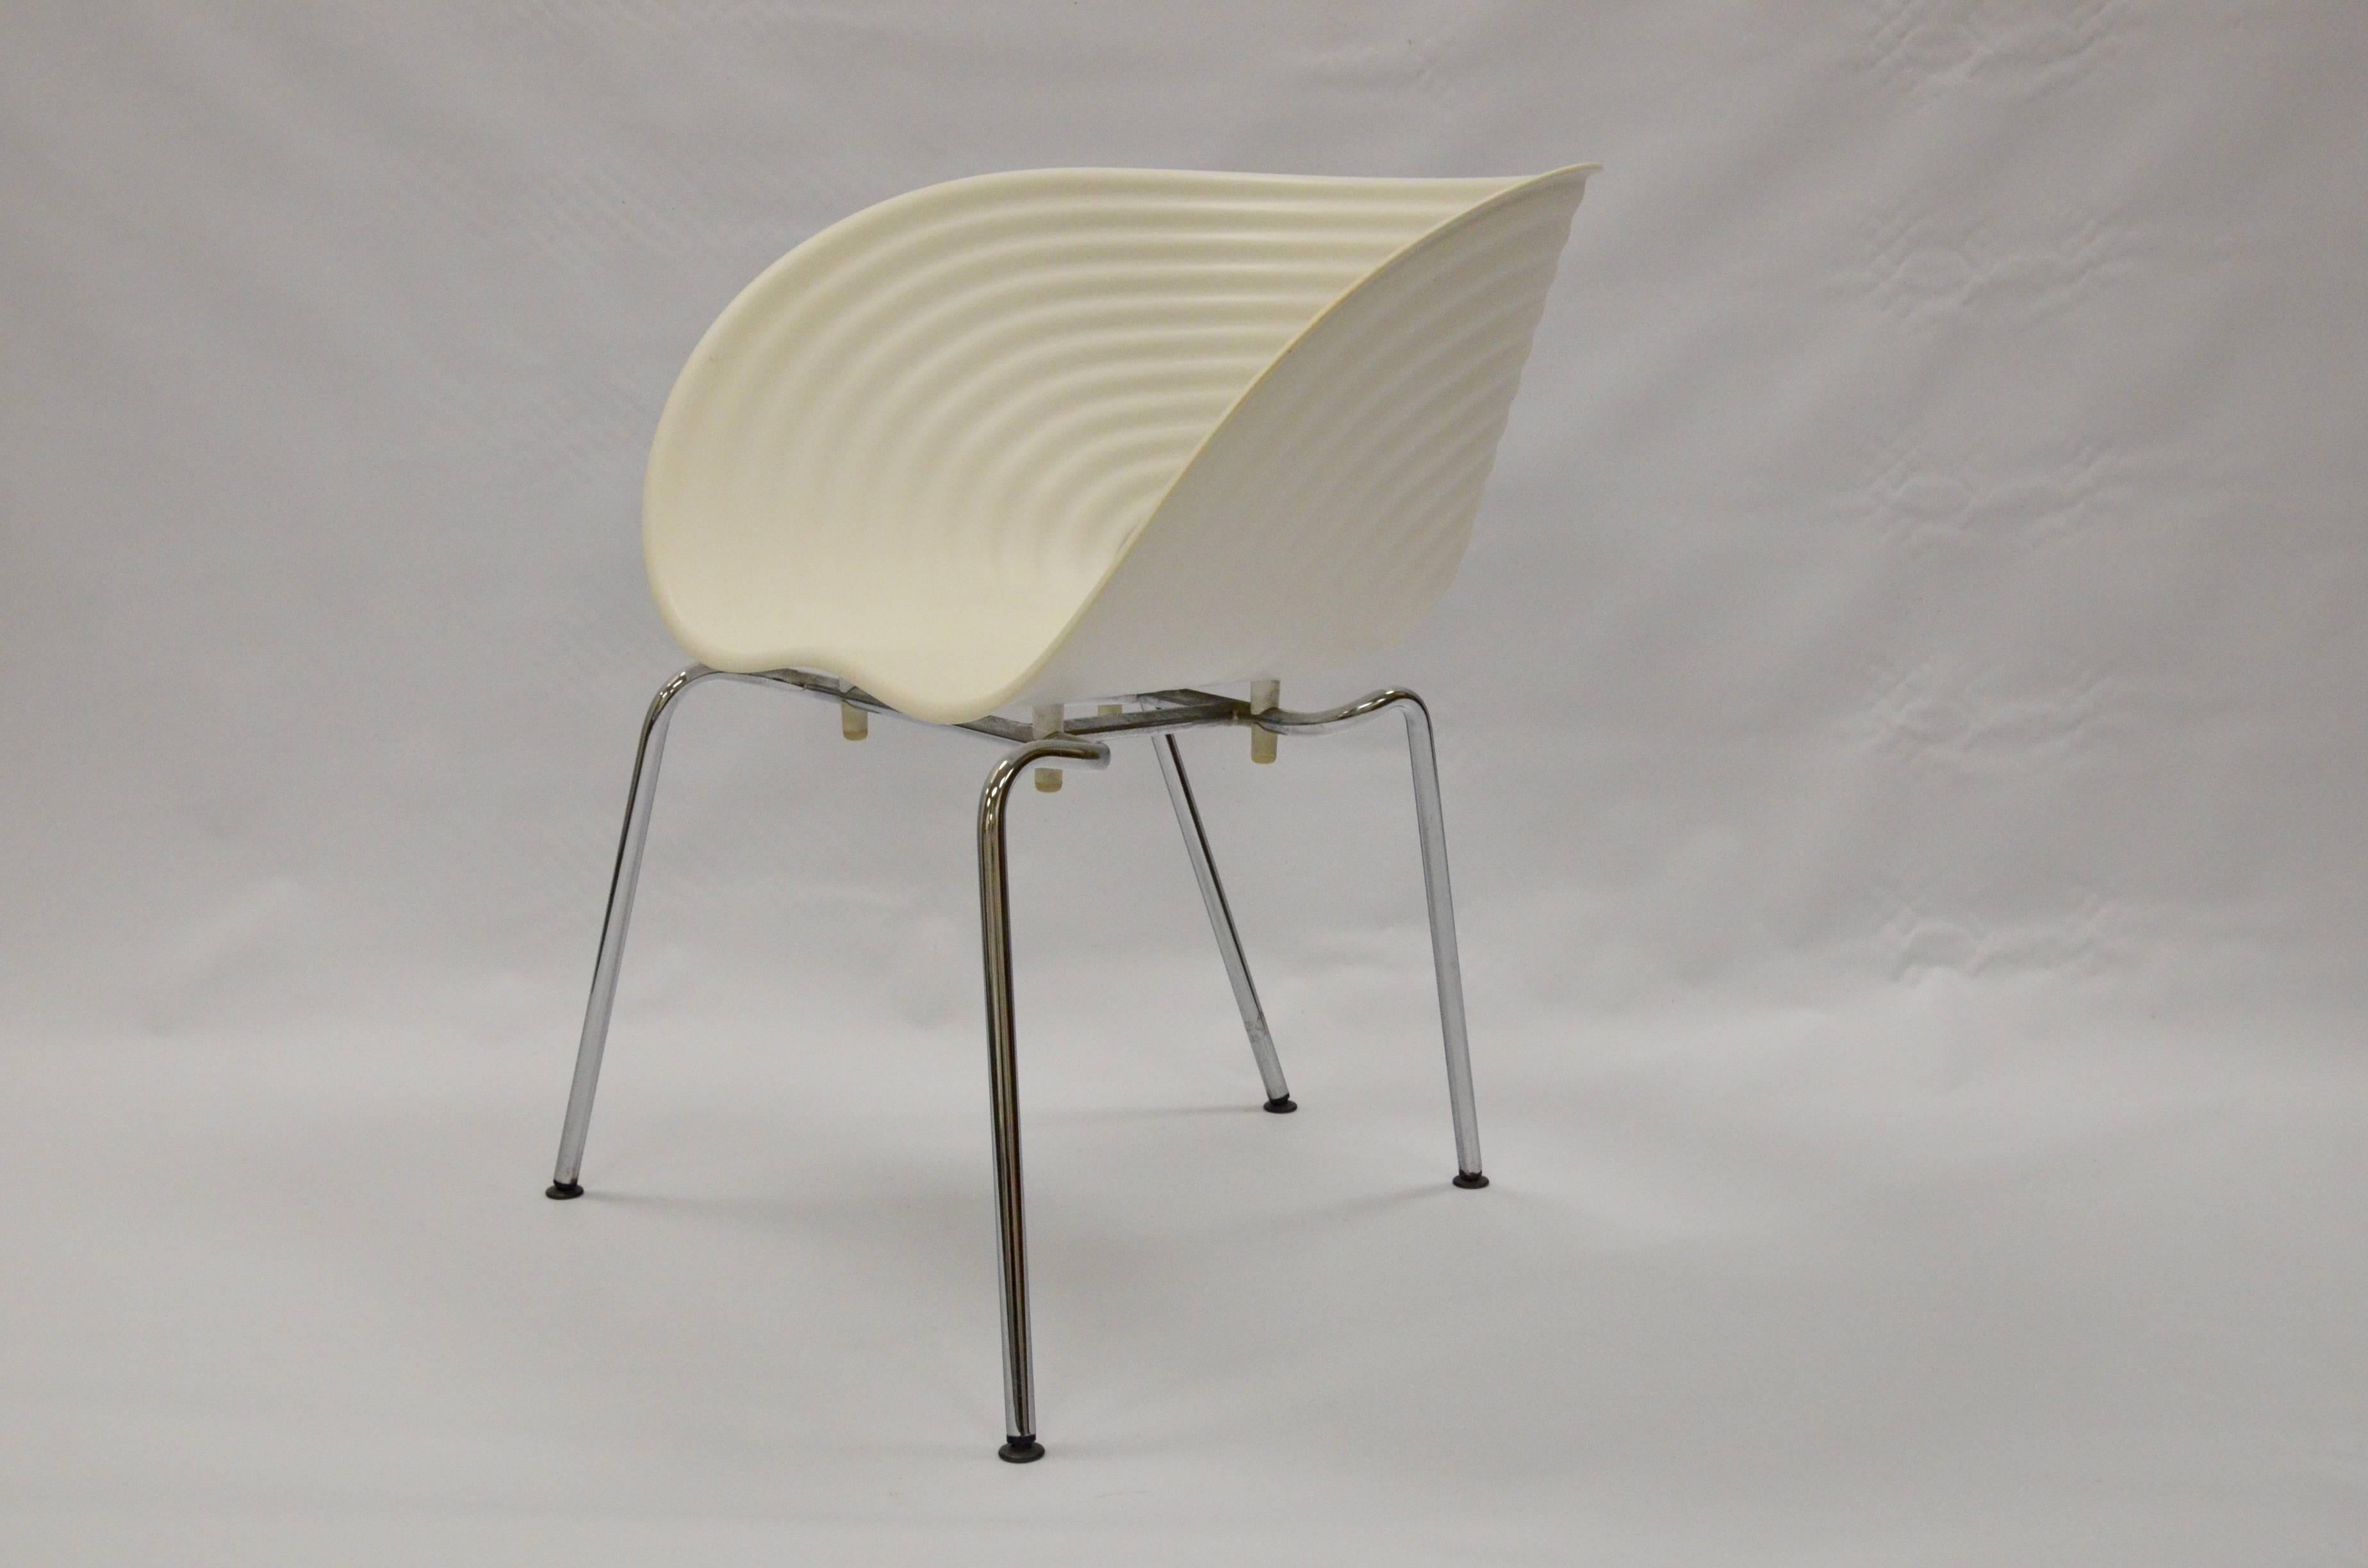 A set of four vintage Tom Vac chairs designed by Ron Arad. The Tom Vac chair features a ribbed plastic shell with a hole in the base, which allows it to be stacked. Chrome legs. 

Originally designed in aluminum by Ron Arad for an installation for